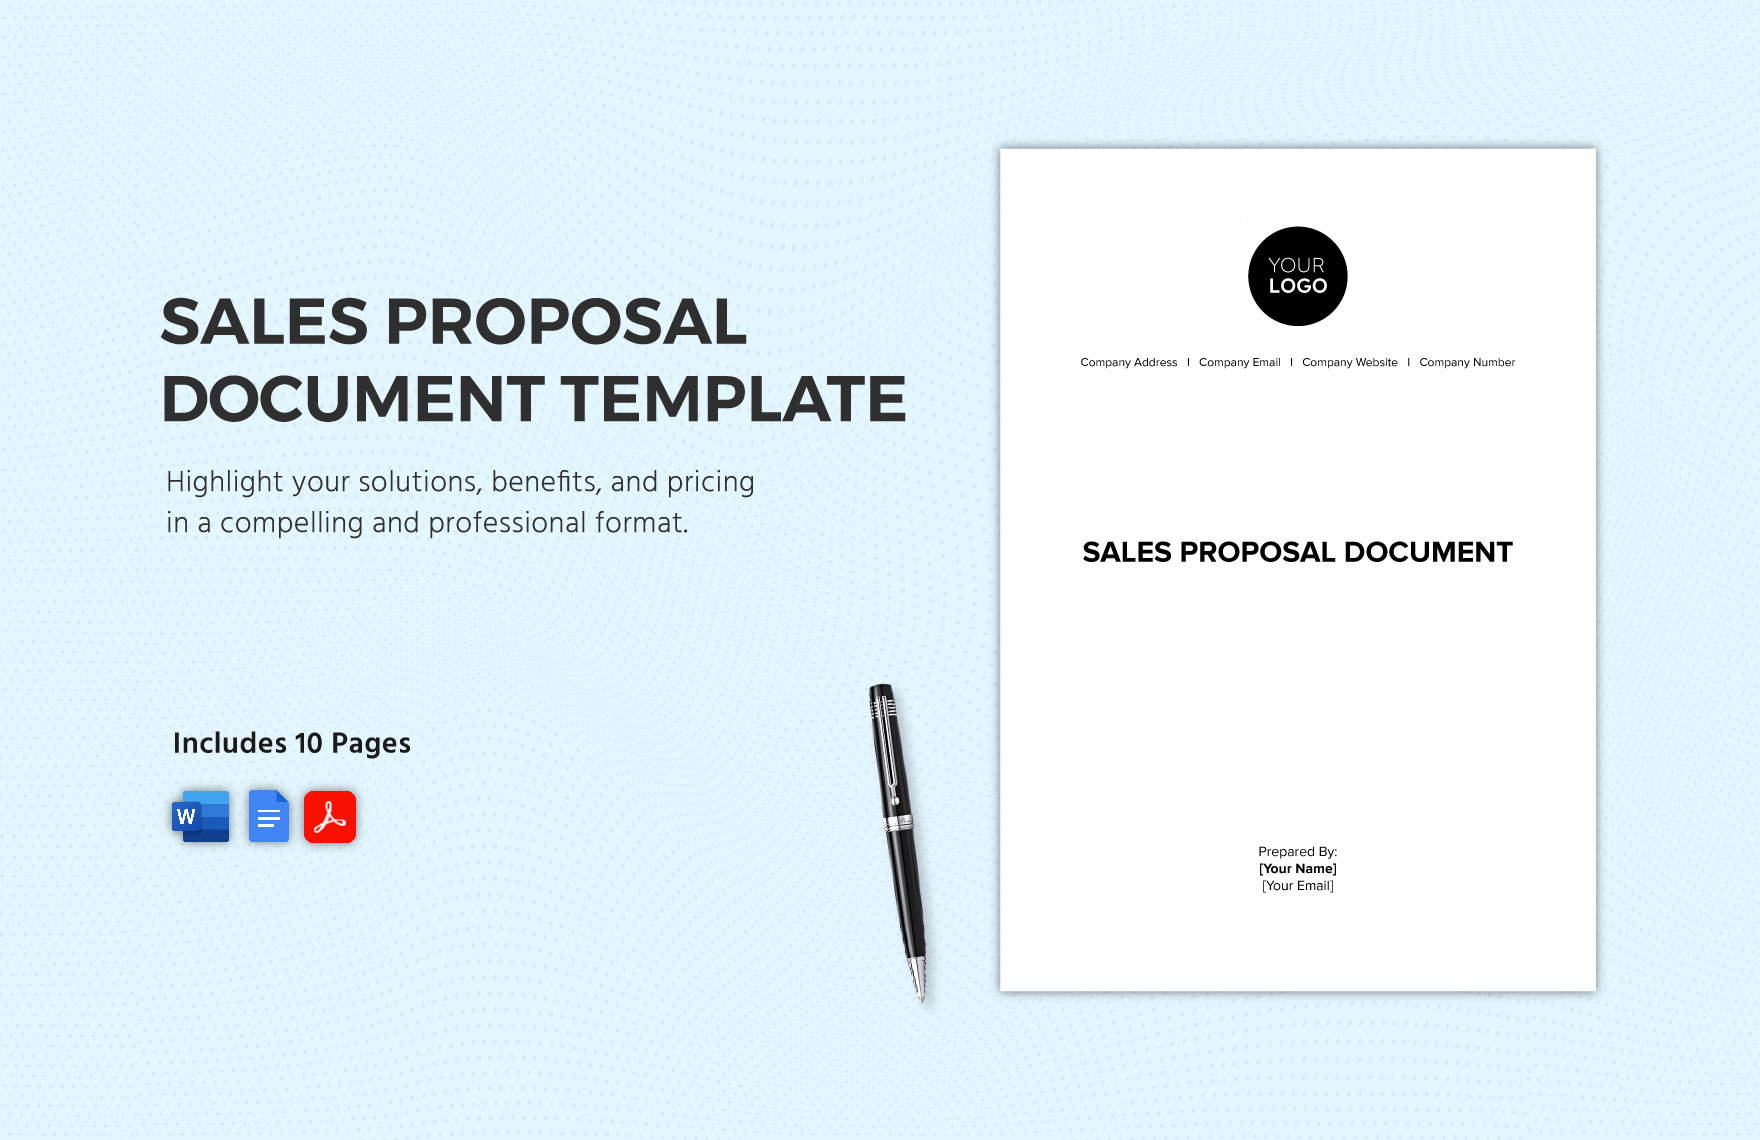 Sales Proposal Document Template in Word, Google Docs, PDF